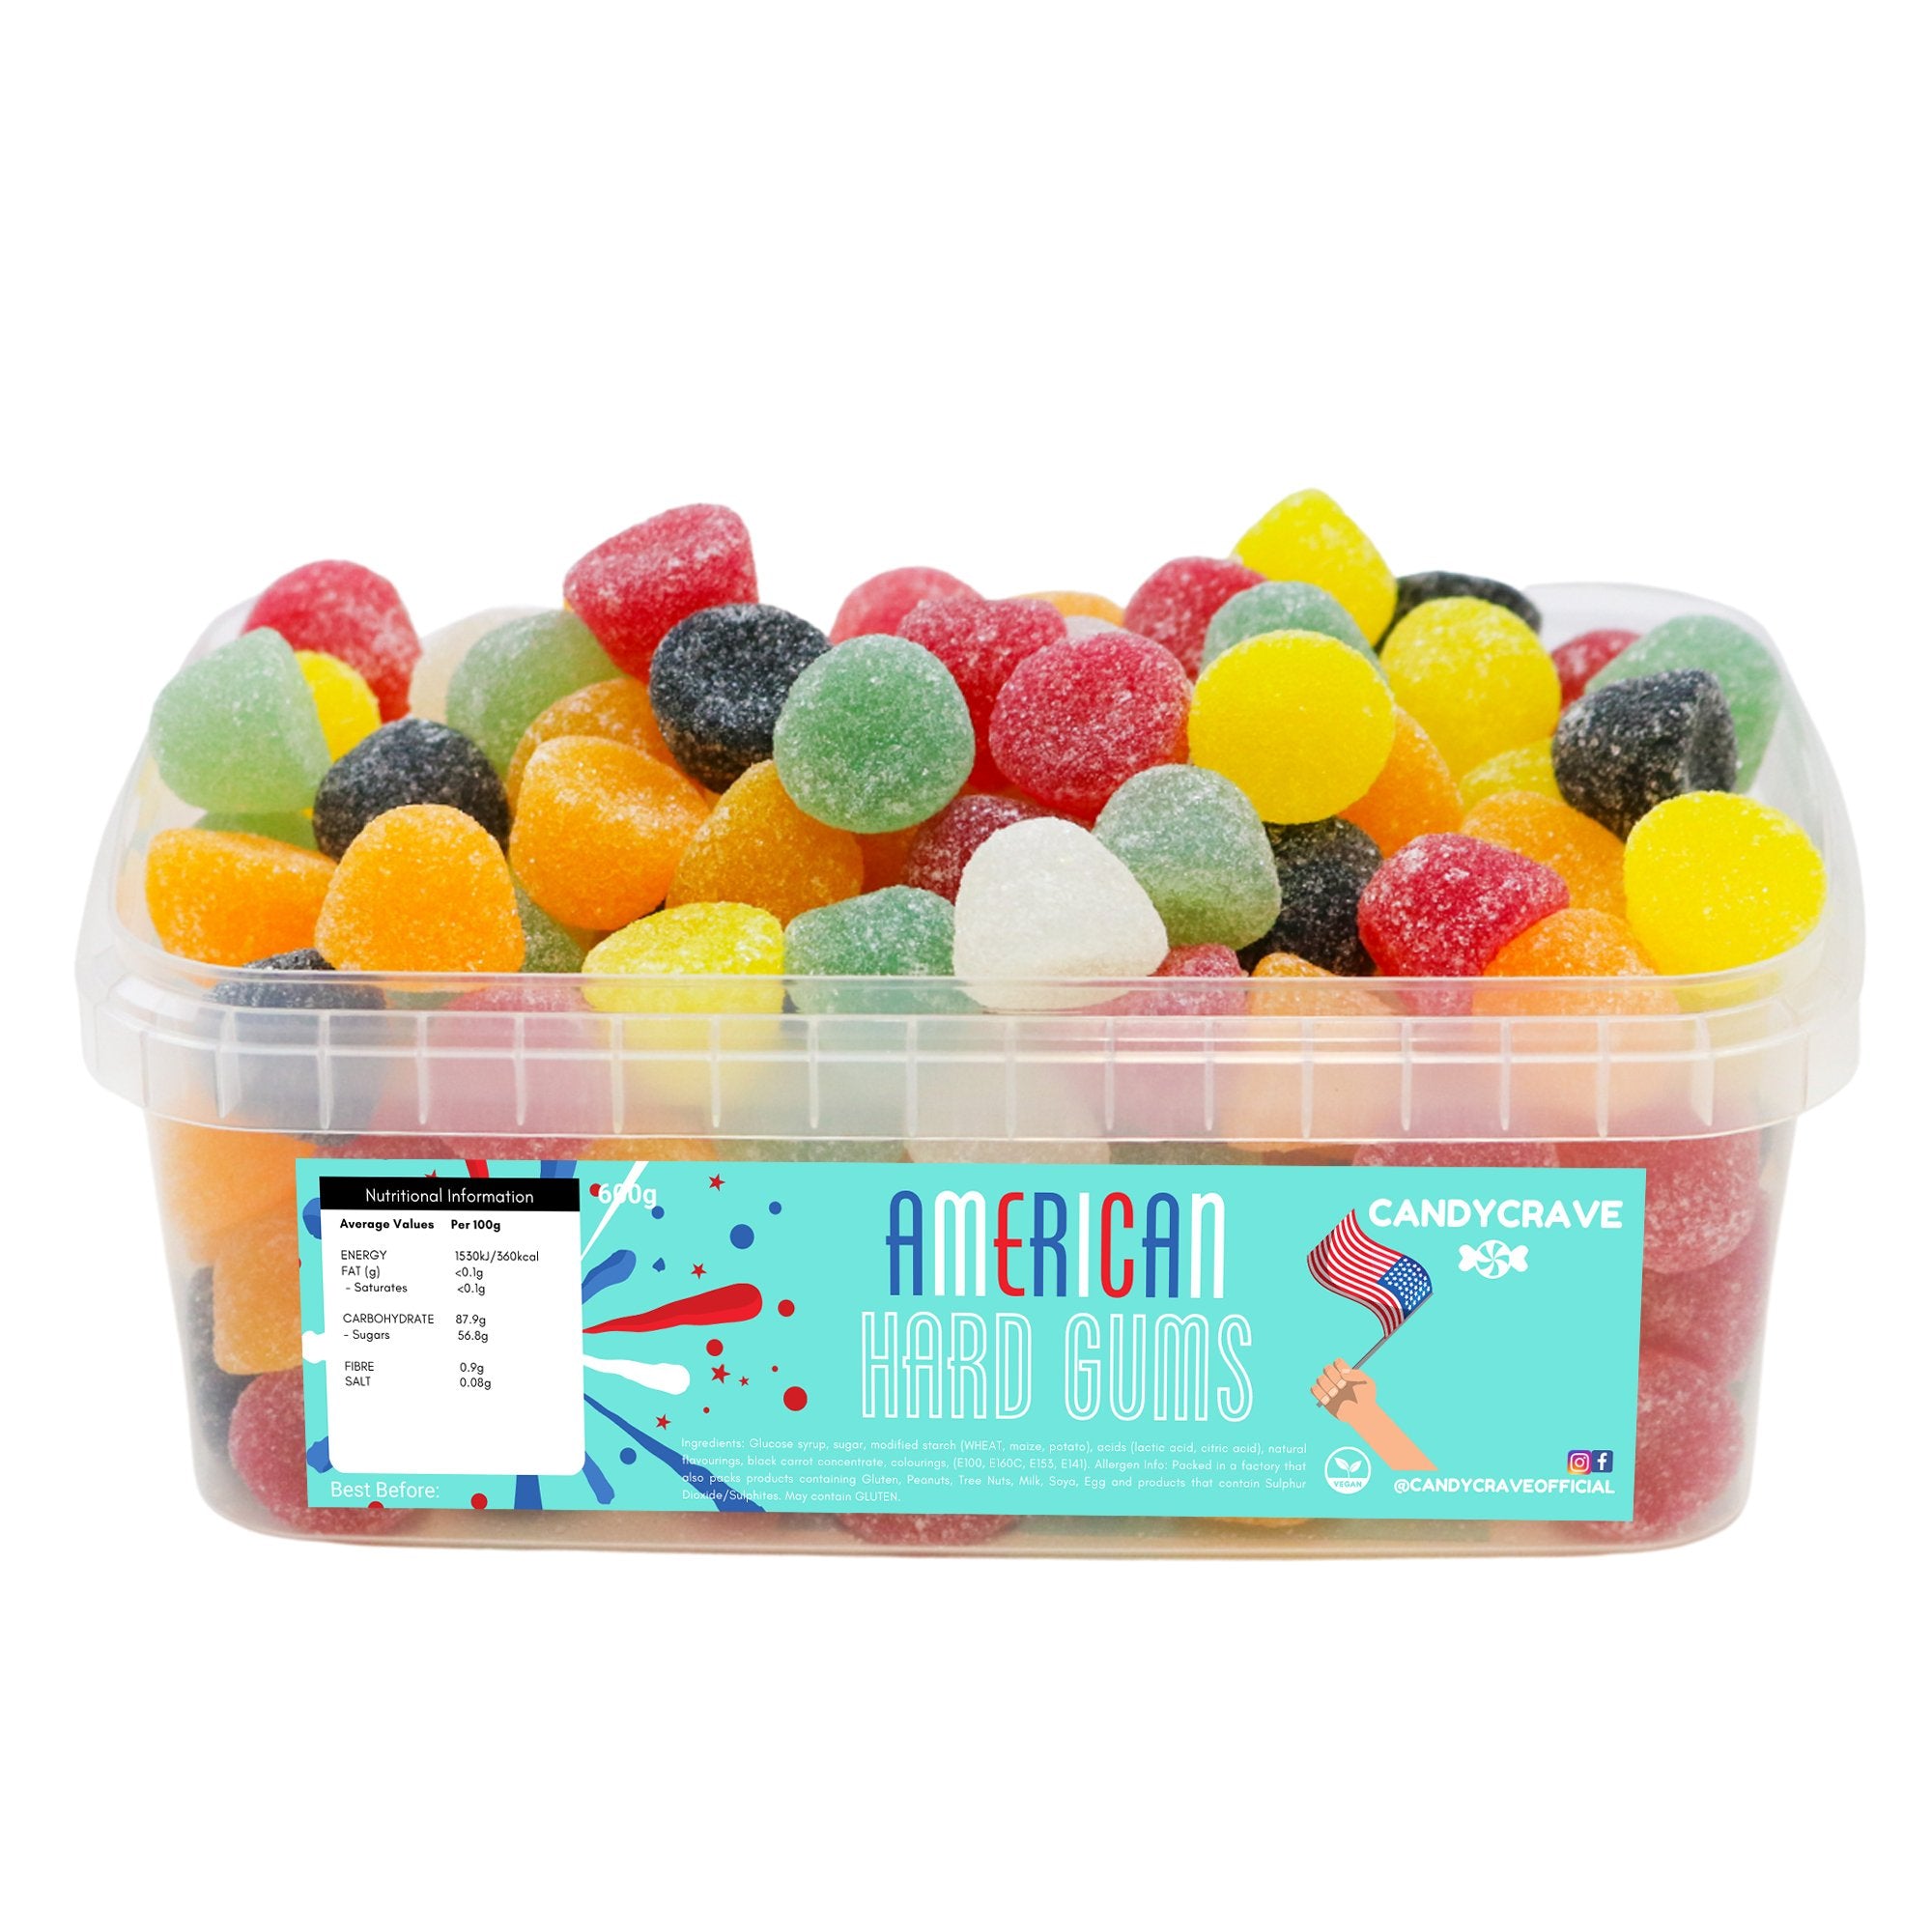 Candy Crave American Hard Gums Tub 600g - Jessica's Sweets